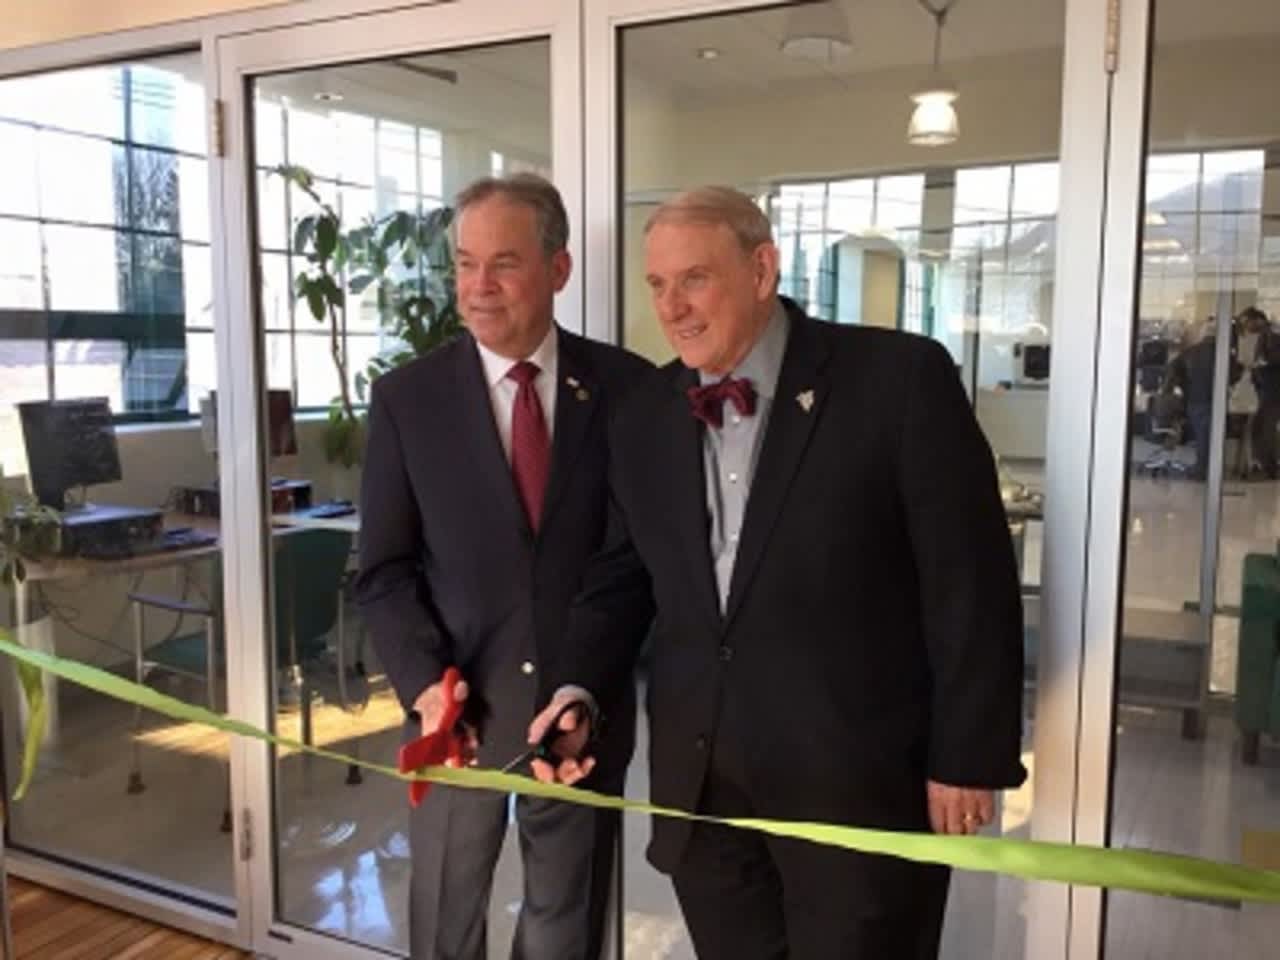 Rockland County Executive Ed Day, left, and Cliff Wood, president of Rockland Community College, cut the ribbon on the new career center in Haverstraw.